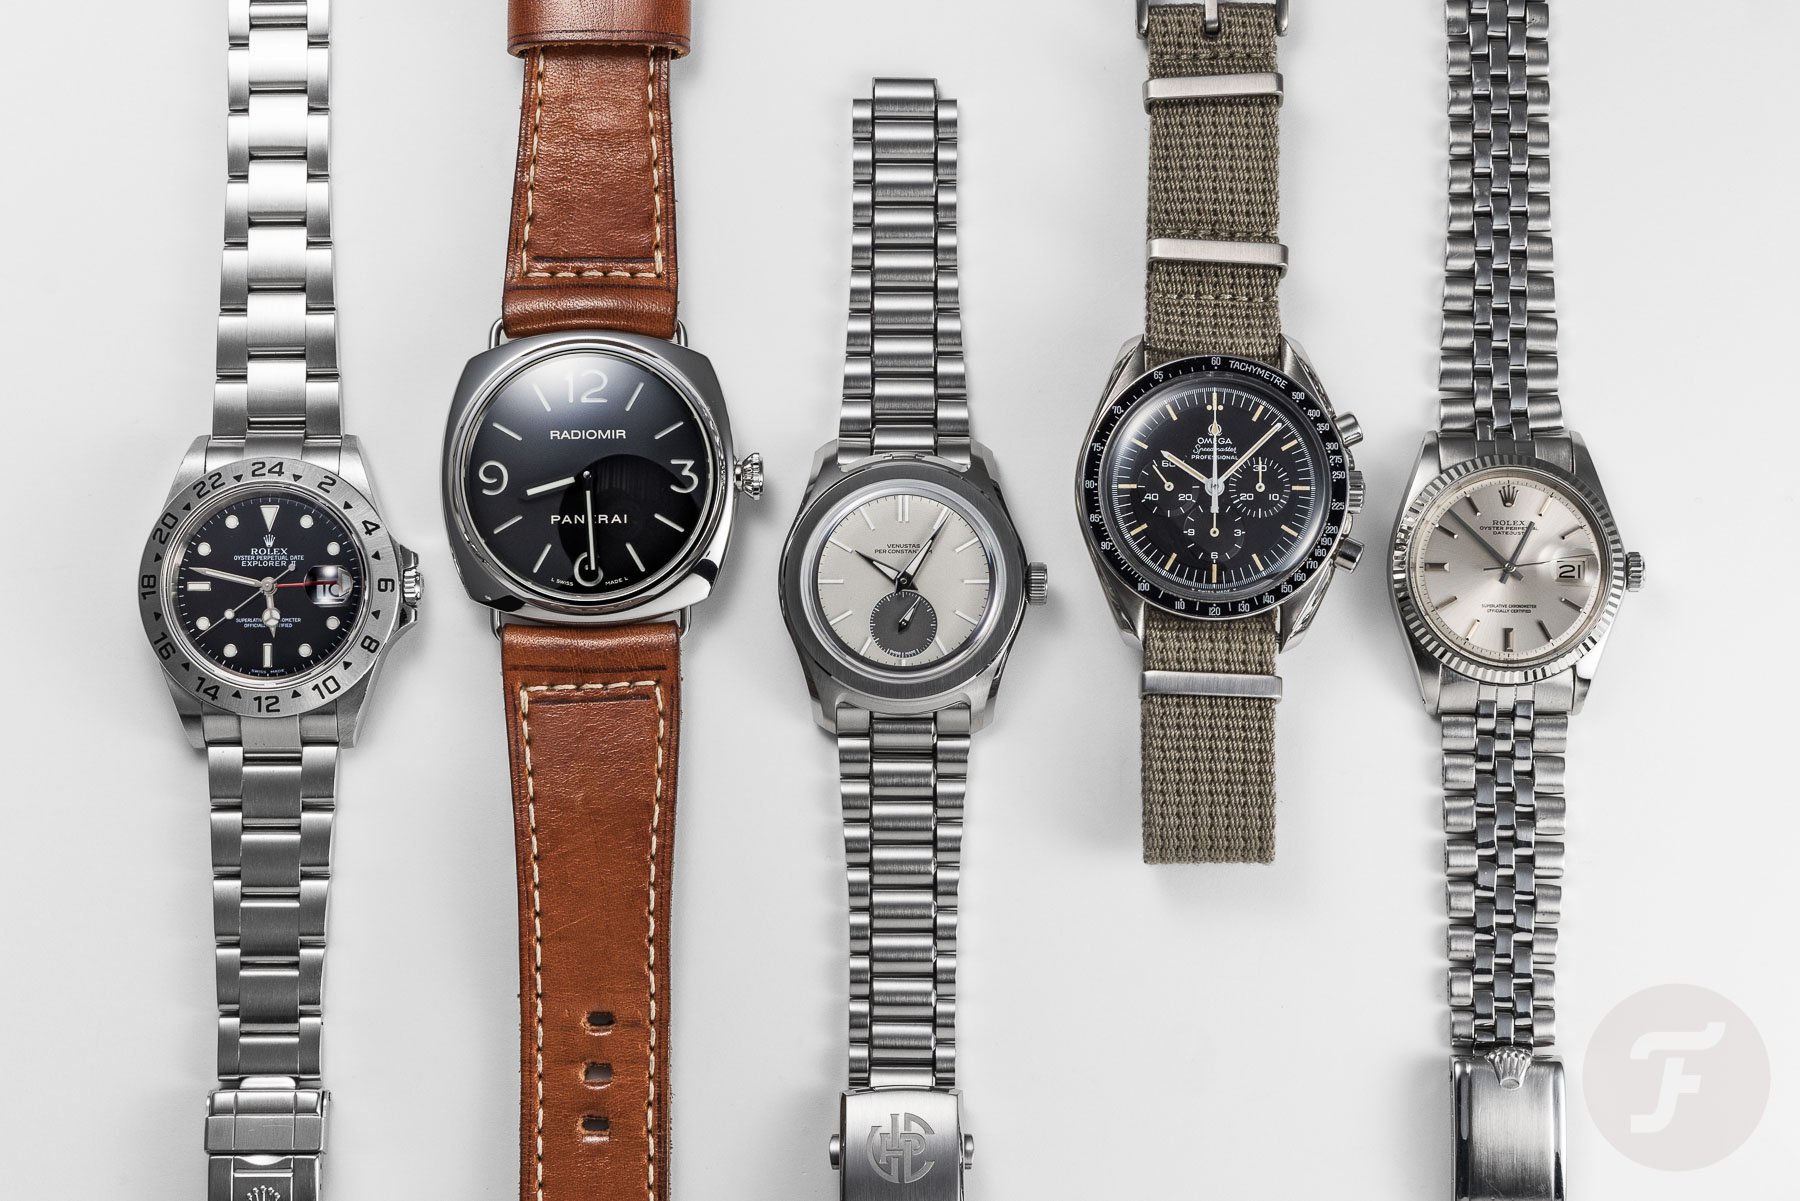 Fratello Editors Share Their Five-Watch Collections: Thomas’s Picks From Rolex, Omega, Panerai, And VPC